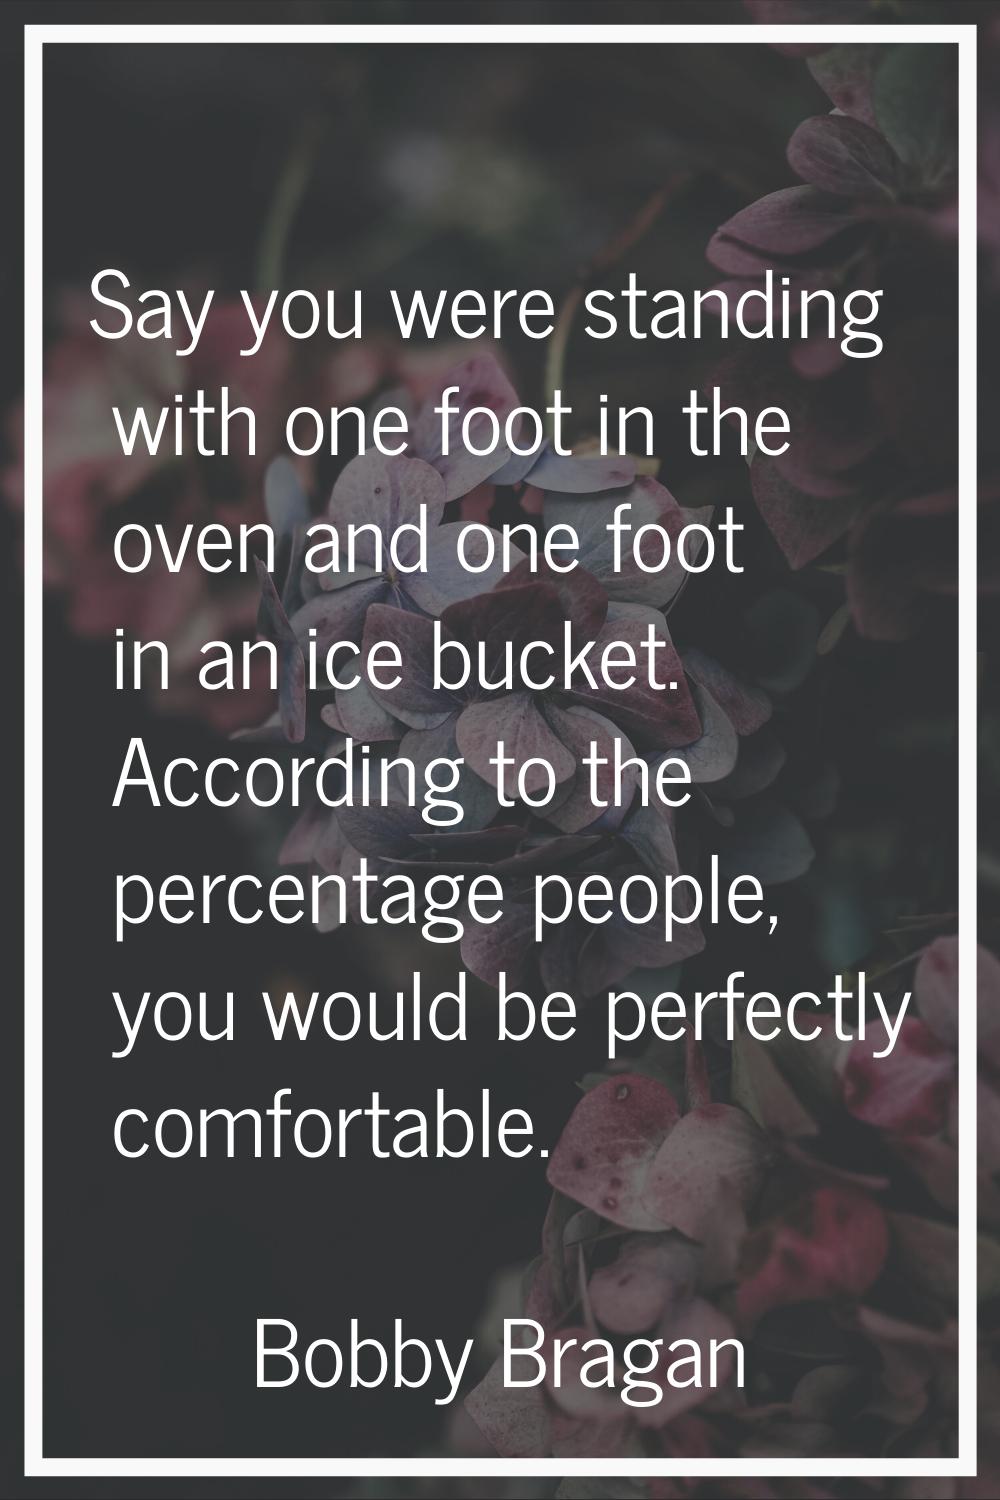 Say you were standing with one foot in the oven and one foot in an ice bucket. According to the per